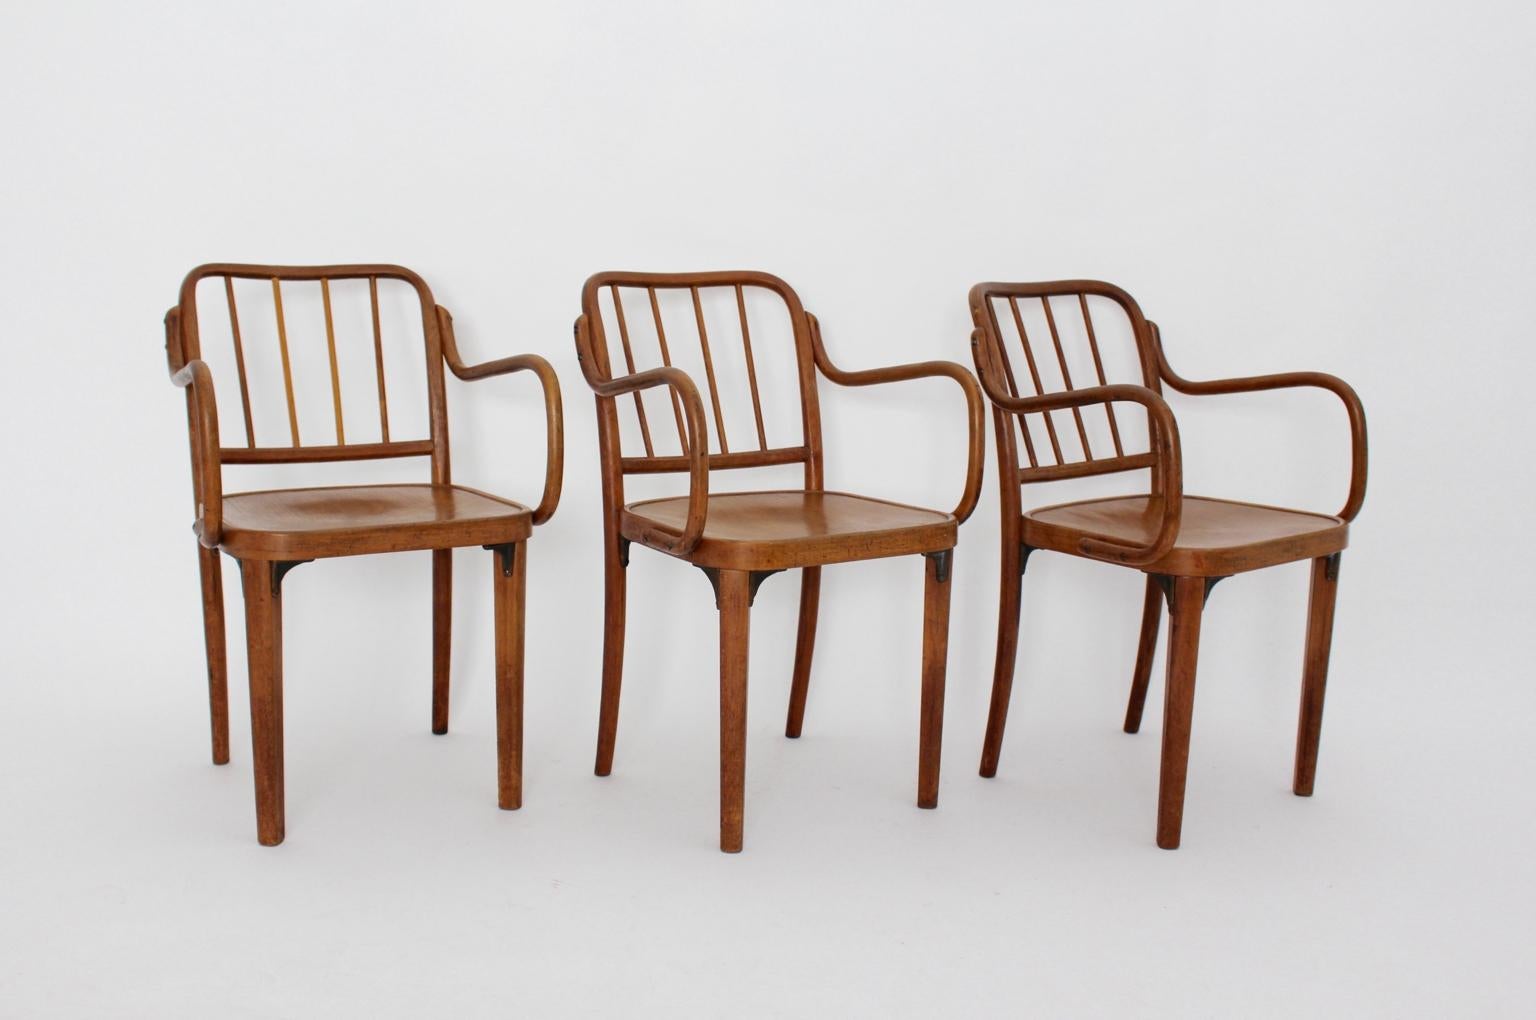 Art Deco three armchairs from oak and plywood in by Josef Frank attributed and executed by Thonet Vienna, 1930s.
The frame of the chairs from oakwood with plywood seats, connected with cast iron elements.
Lacquered and in good condition, ready to